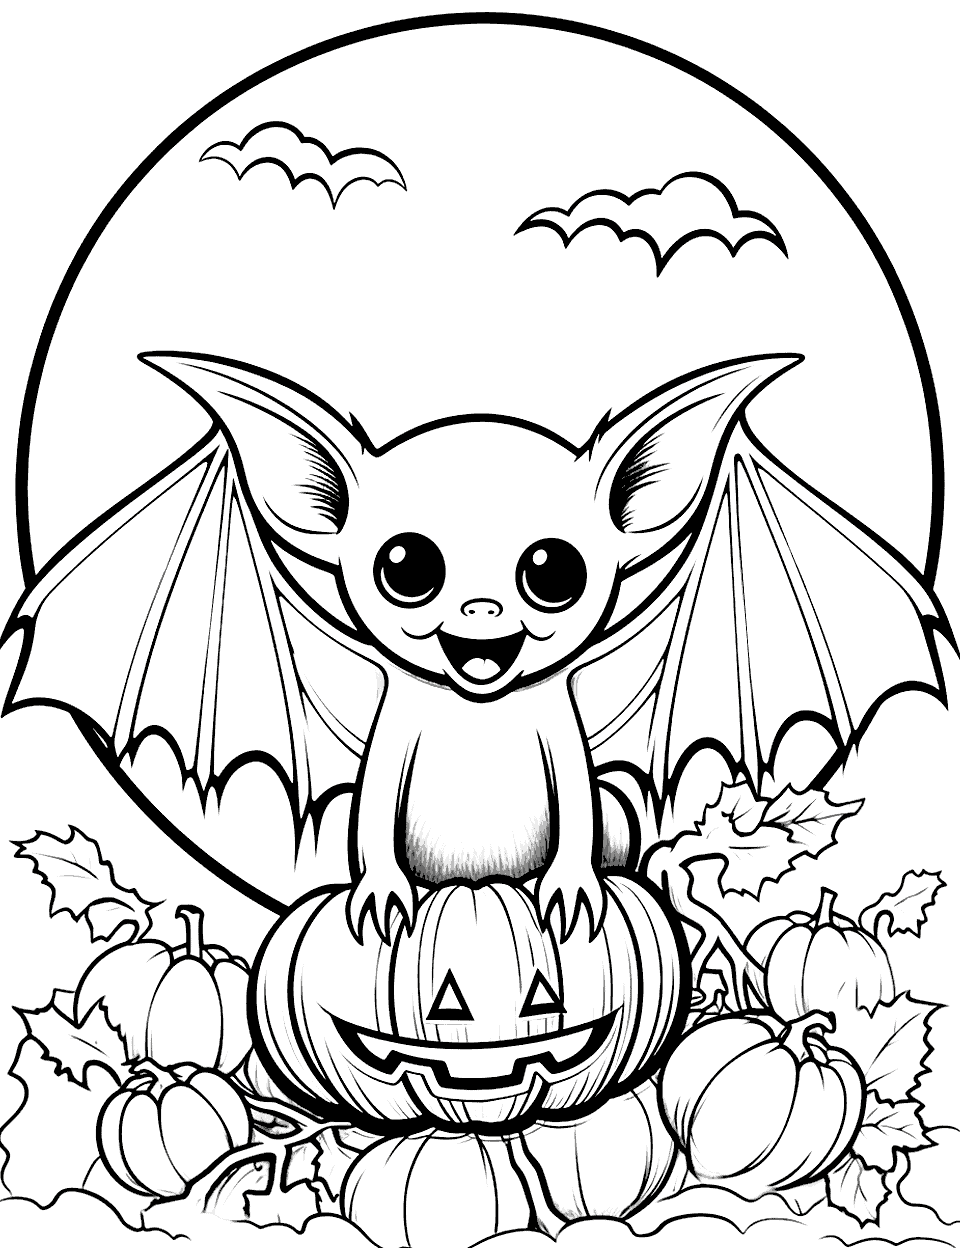 Bat with a Pumpkin Coloring Page - A bat with a pumpkin suitable for Halloween.